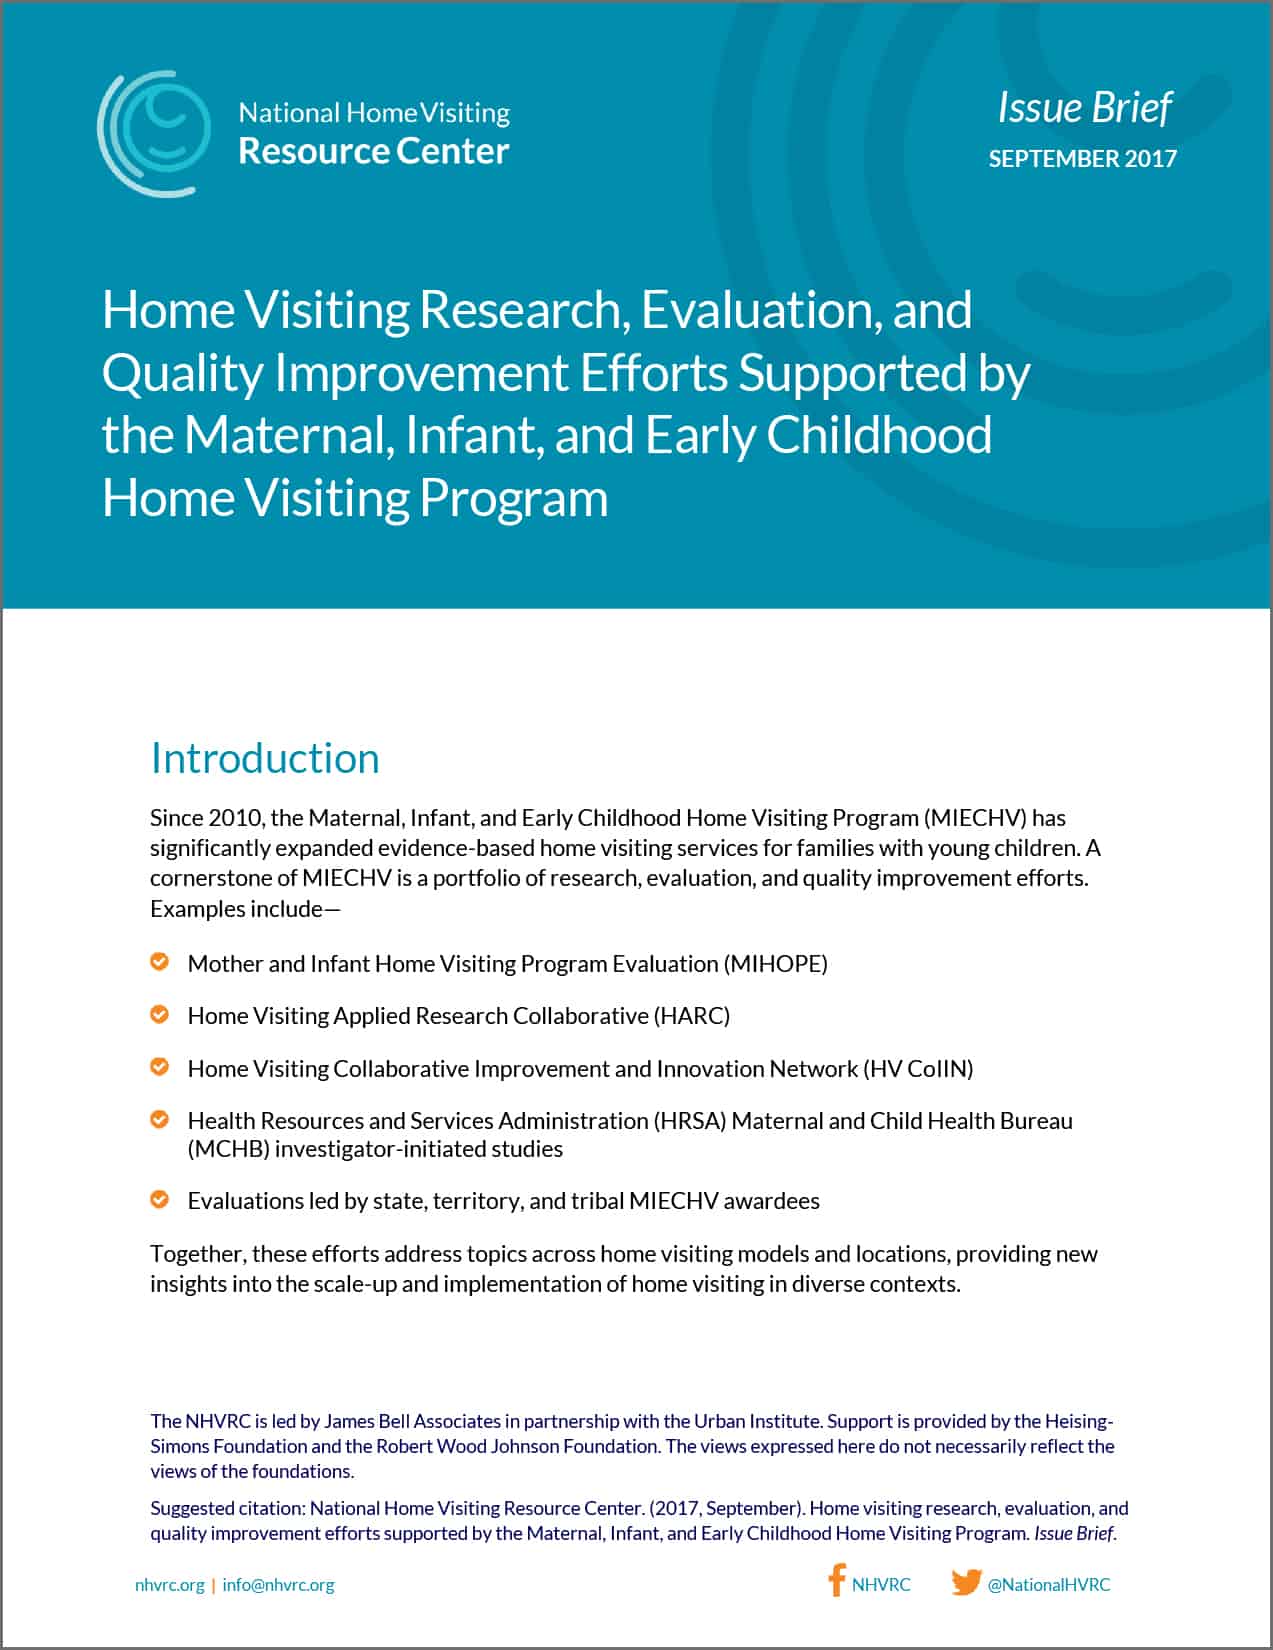 NHVRC Issue Brief, Home Visiting Research, Evaluation, and Quality Improvement Efforts Supported by the Maternal, Infant, and Early Childhood Home Visiting Program